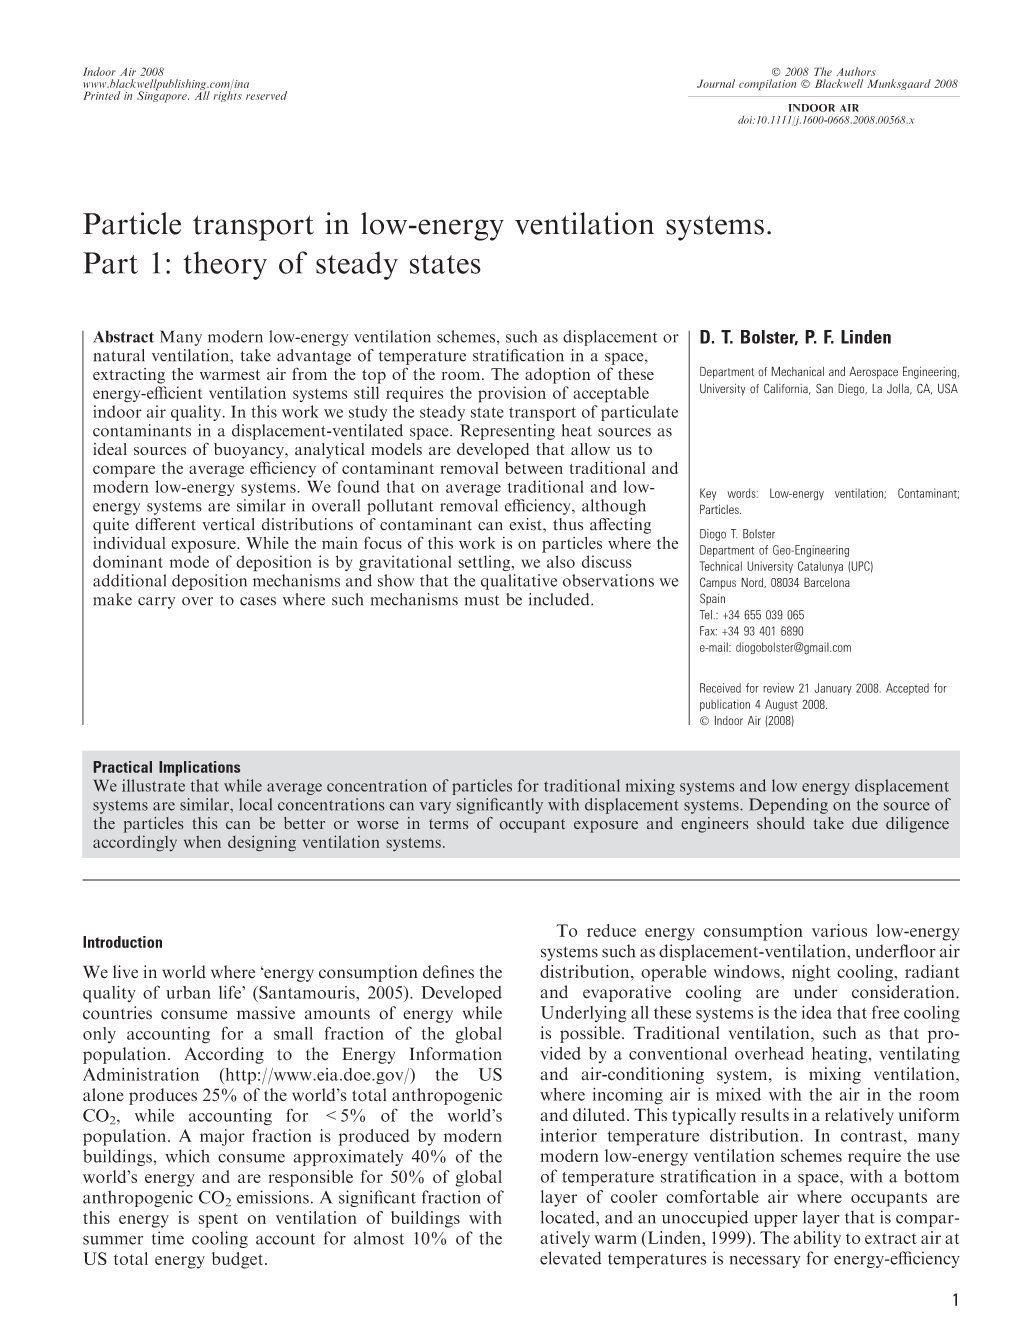 Particle Transport in Low-Energy Ventilation Systems. Part 1: Theory of Steady States